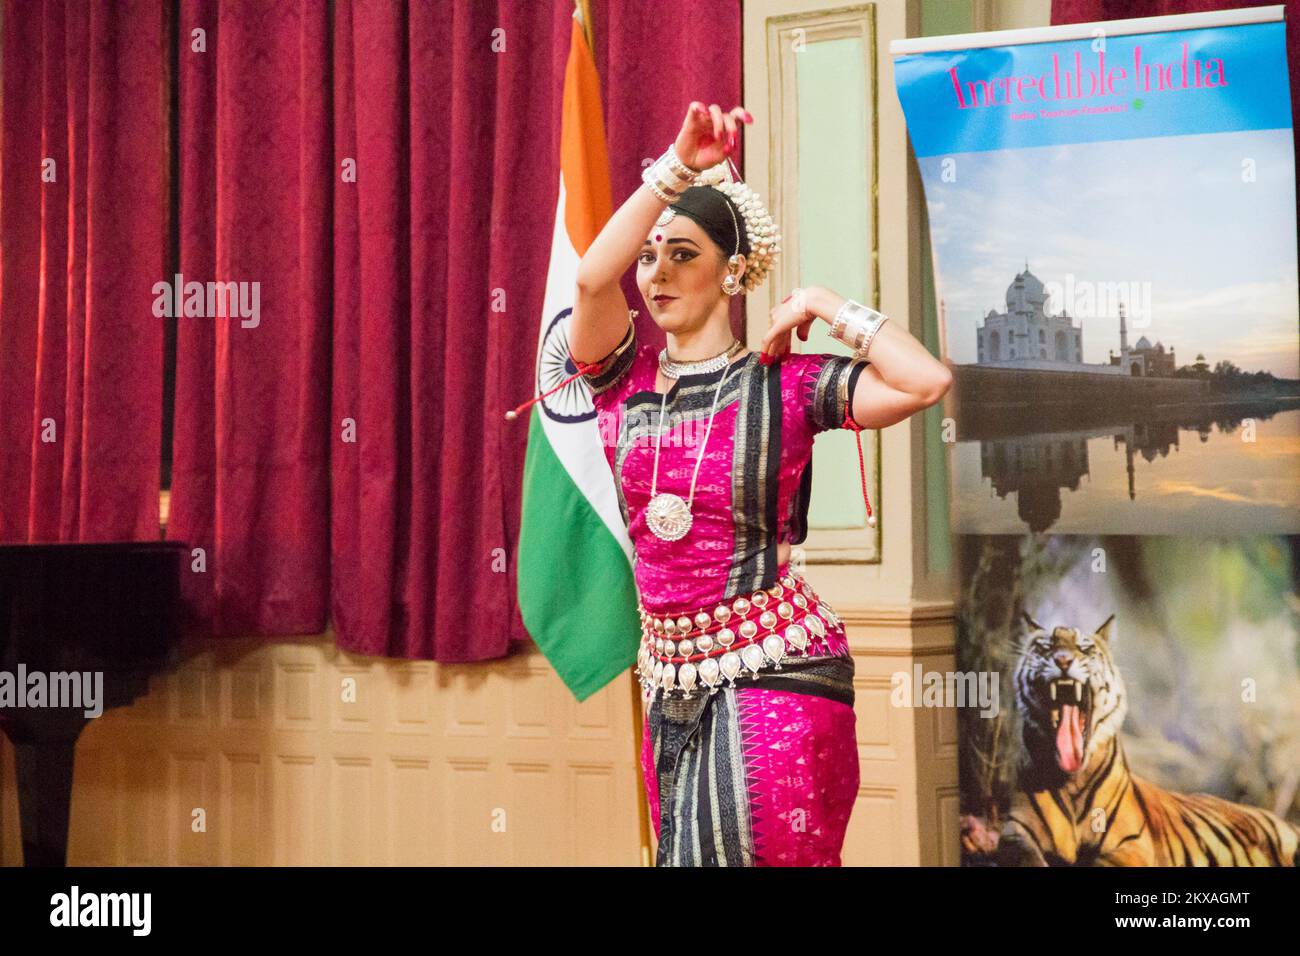 07.02.2019, Bosnia and Herzegovina, Sarajevo - As part of the day-long opening program of the 35th International Festival "Sarajevo winter 2019" in the House of Armed Forces of Bosnia and Herzegovina, a dance group from India with the world-renowned performance of Indian Traditional drum "Table" Rajesh Gangani performed. Photo: Aleksandar Knezevic/HaloPix/PIXSELL Stock Photo